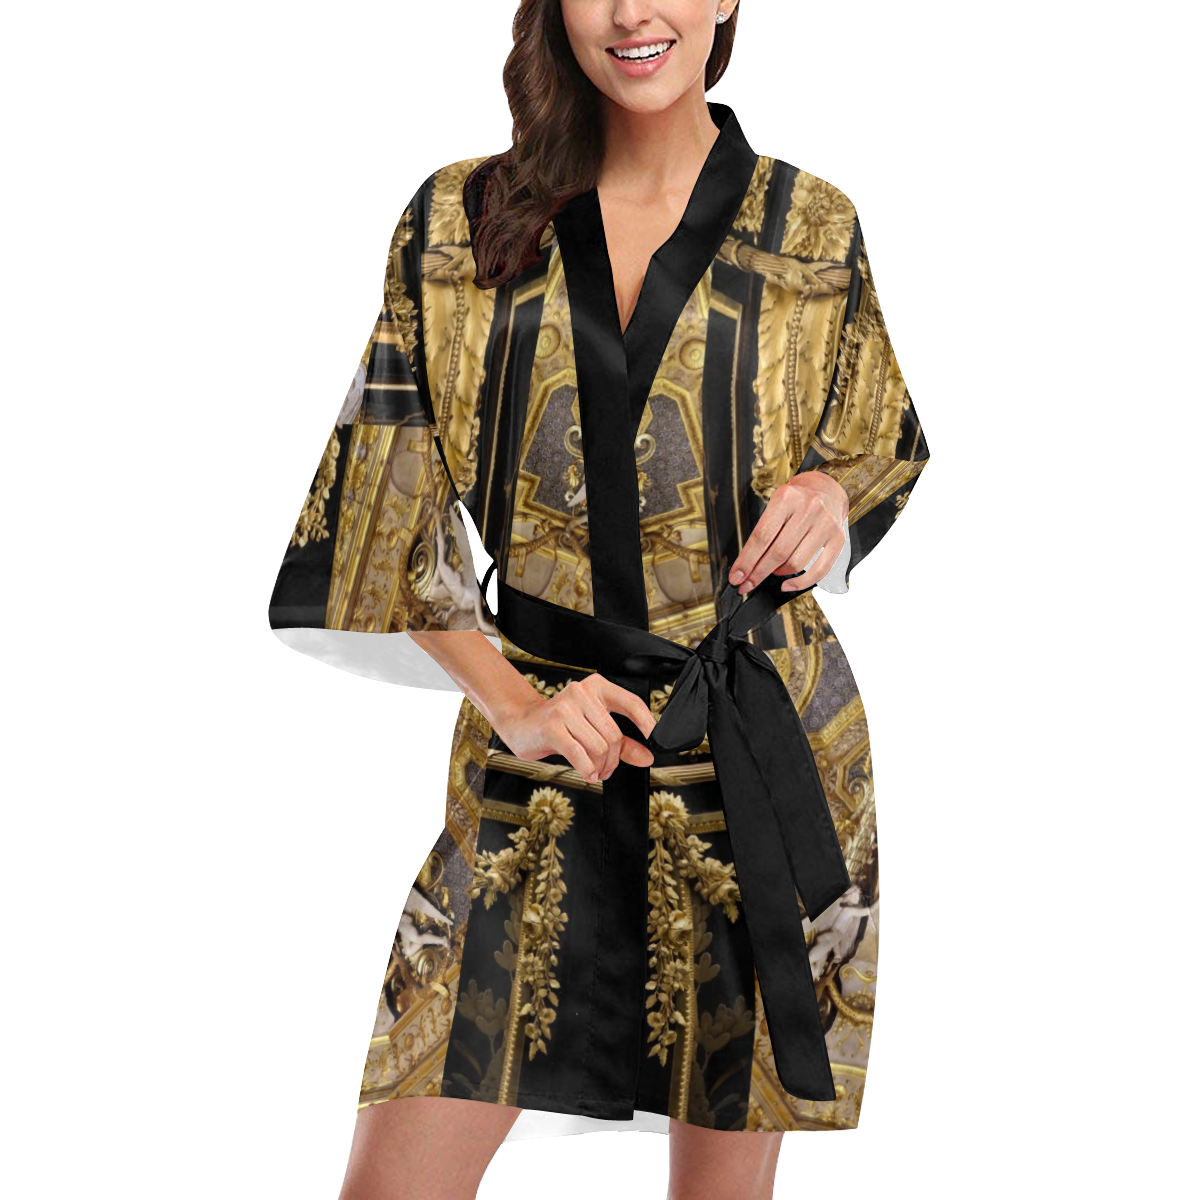 Robe | amazon robes kohls womens robes quince robe